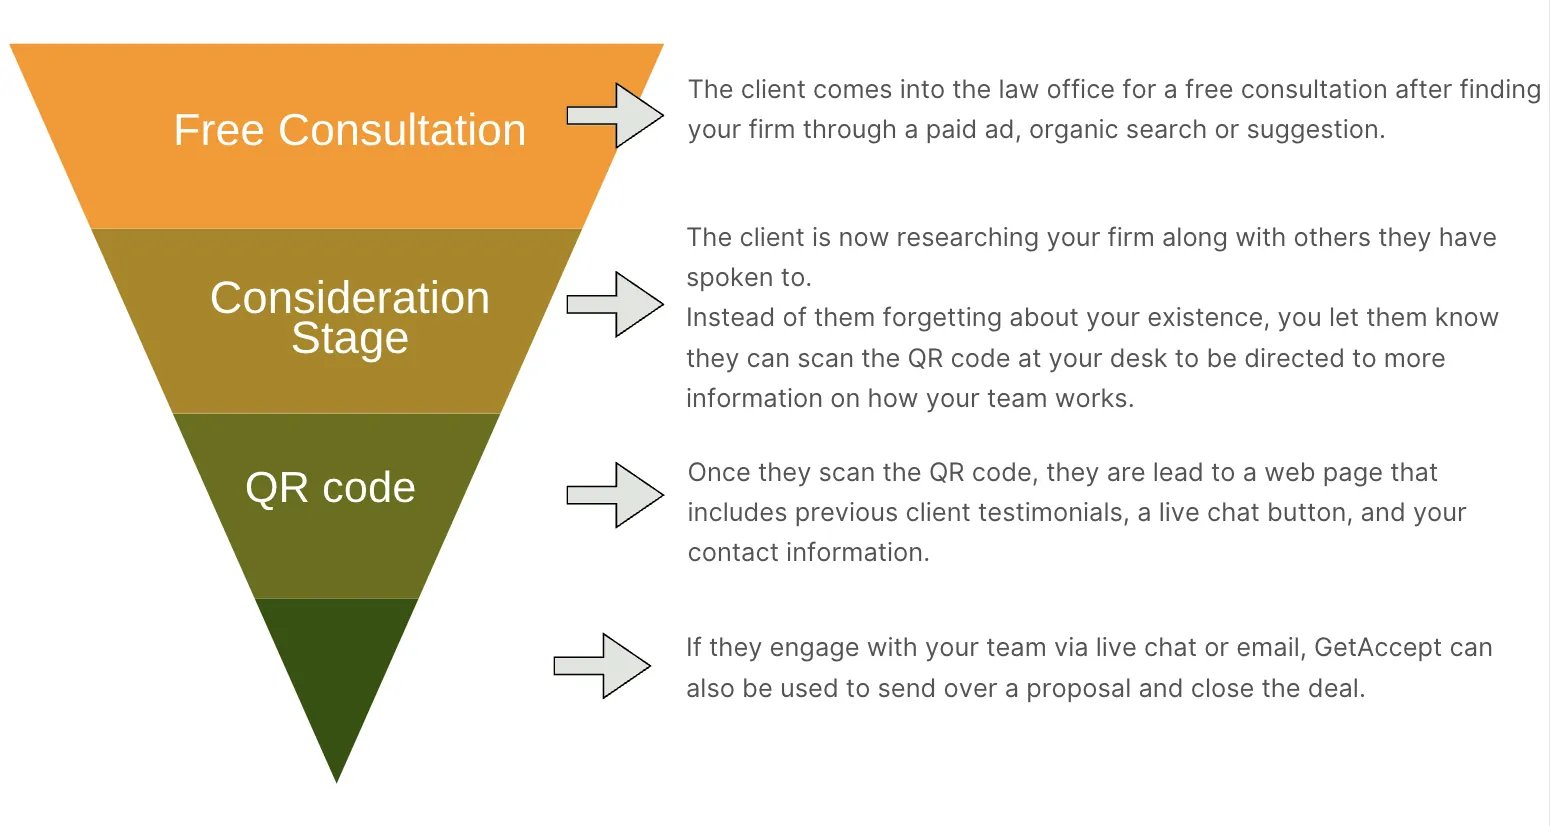 sales funnel for a law firm that includes the usage of a QR code and GetAccept